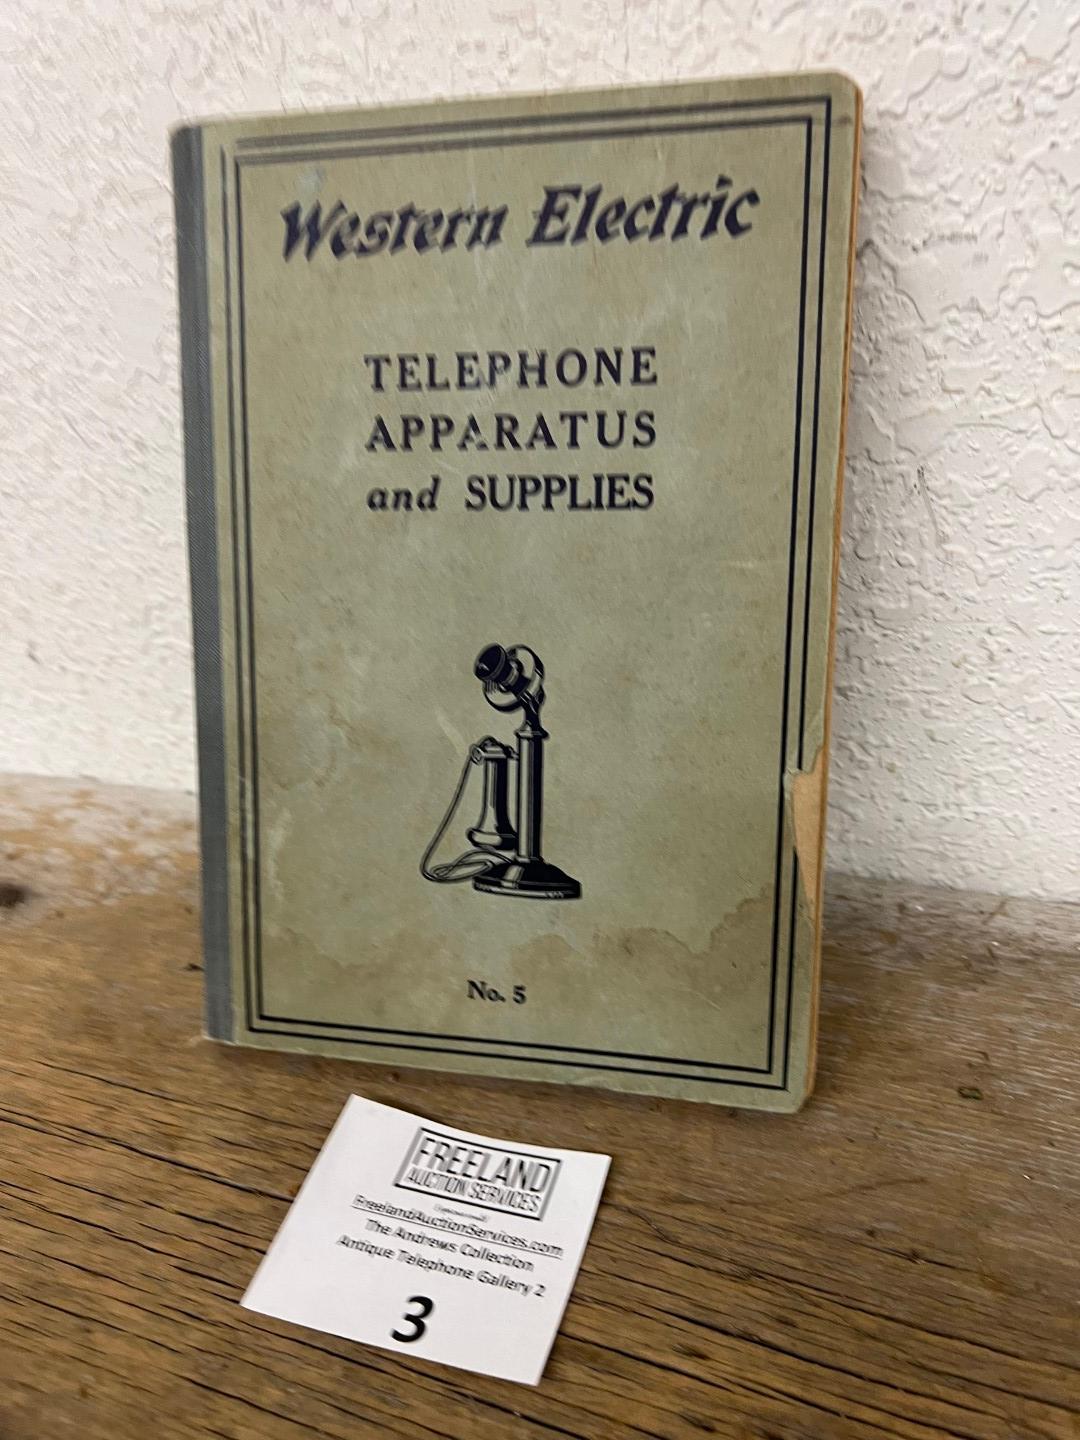 Western Electric Telephone Apparatus & Supplies No. 5 Catalog 336 Pages